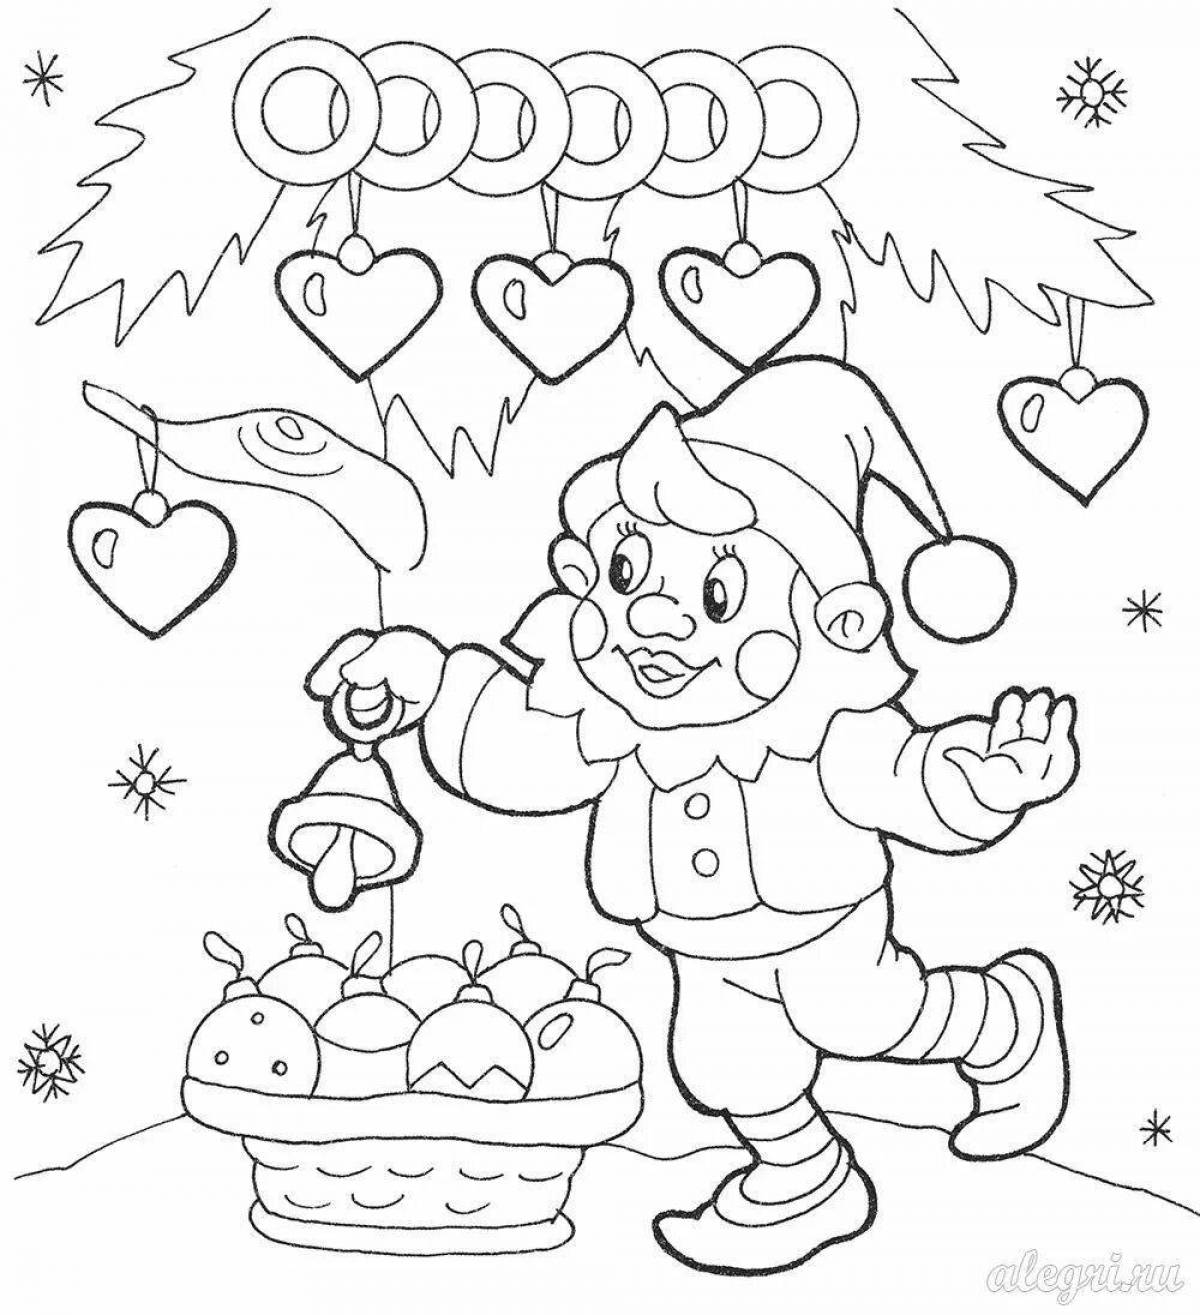 Color-frenzy new year 9 years coloring page